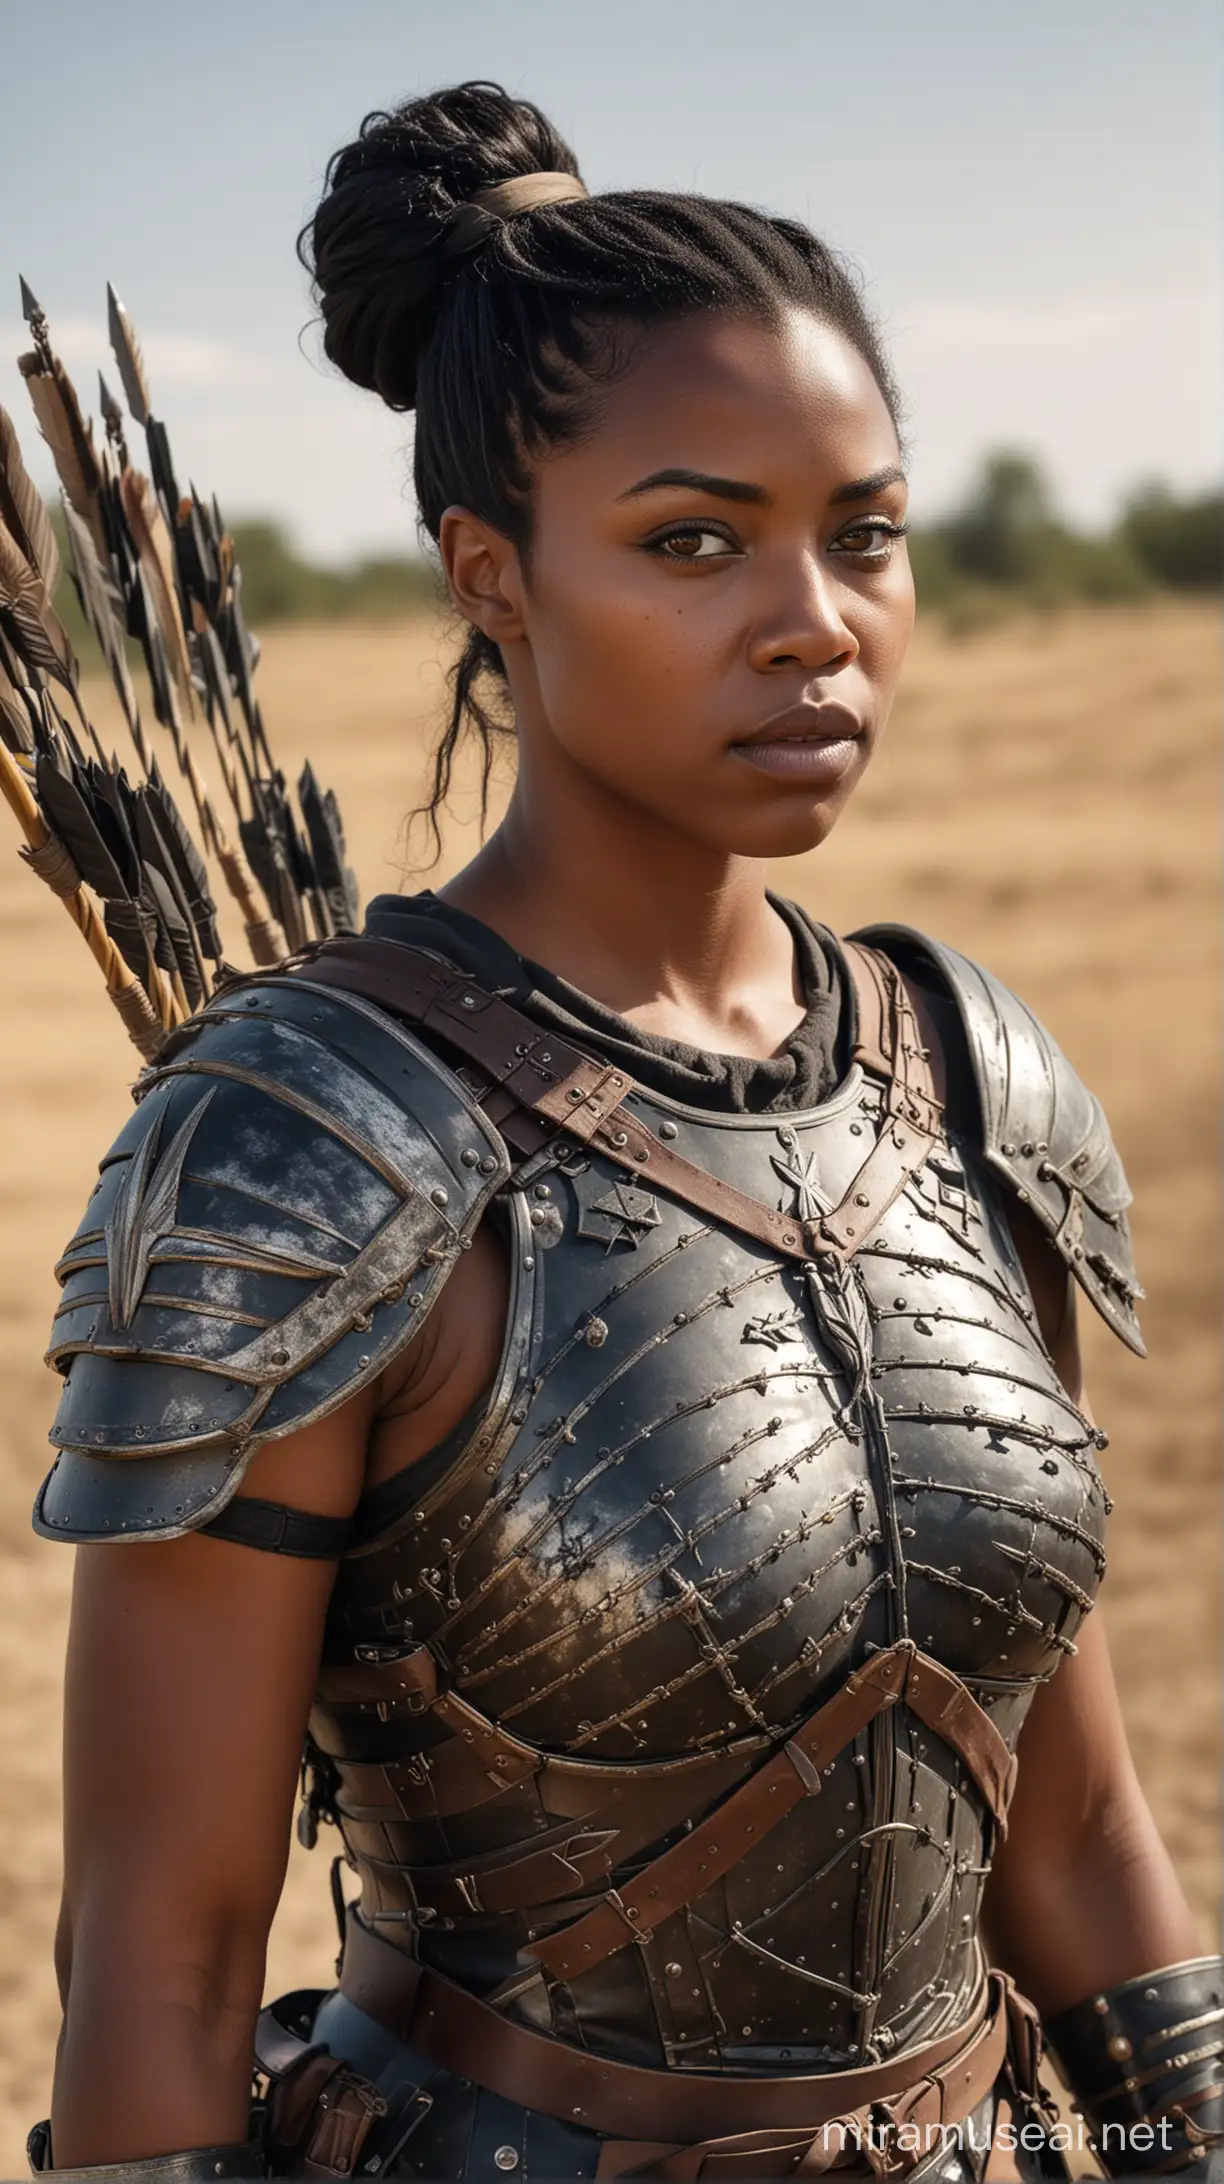 A 43 year old fat black woman with small eyes, wide lips, weak chin, small nose and long straight black hair with a bun at back wearing a heavy war armour, a quiver of arrows strapped on back, holding a bow and standing in a battlefield 